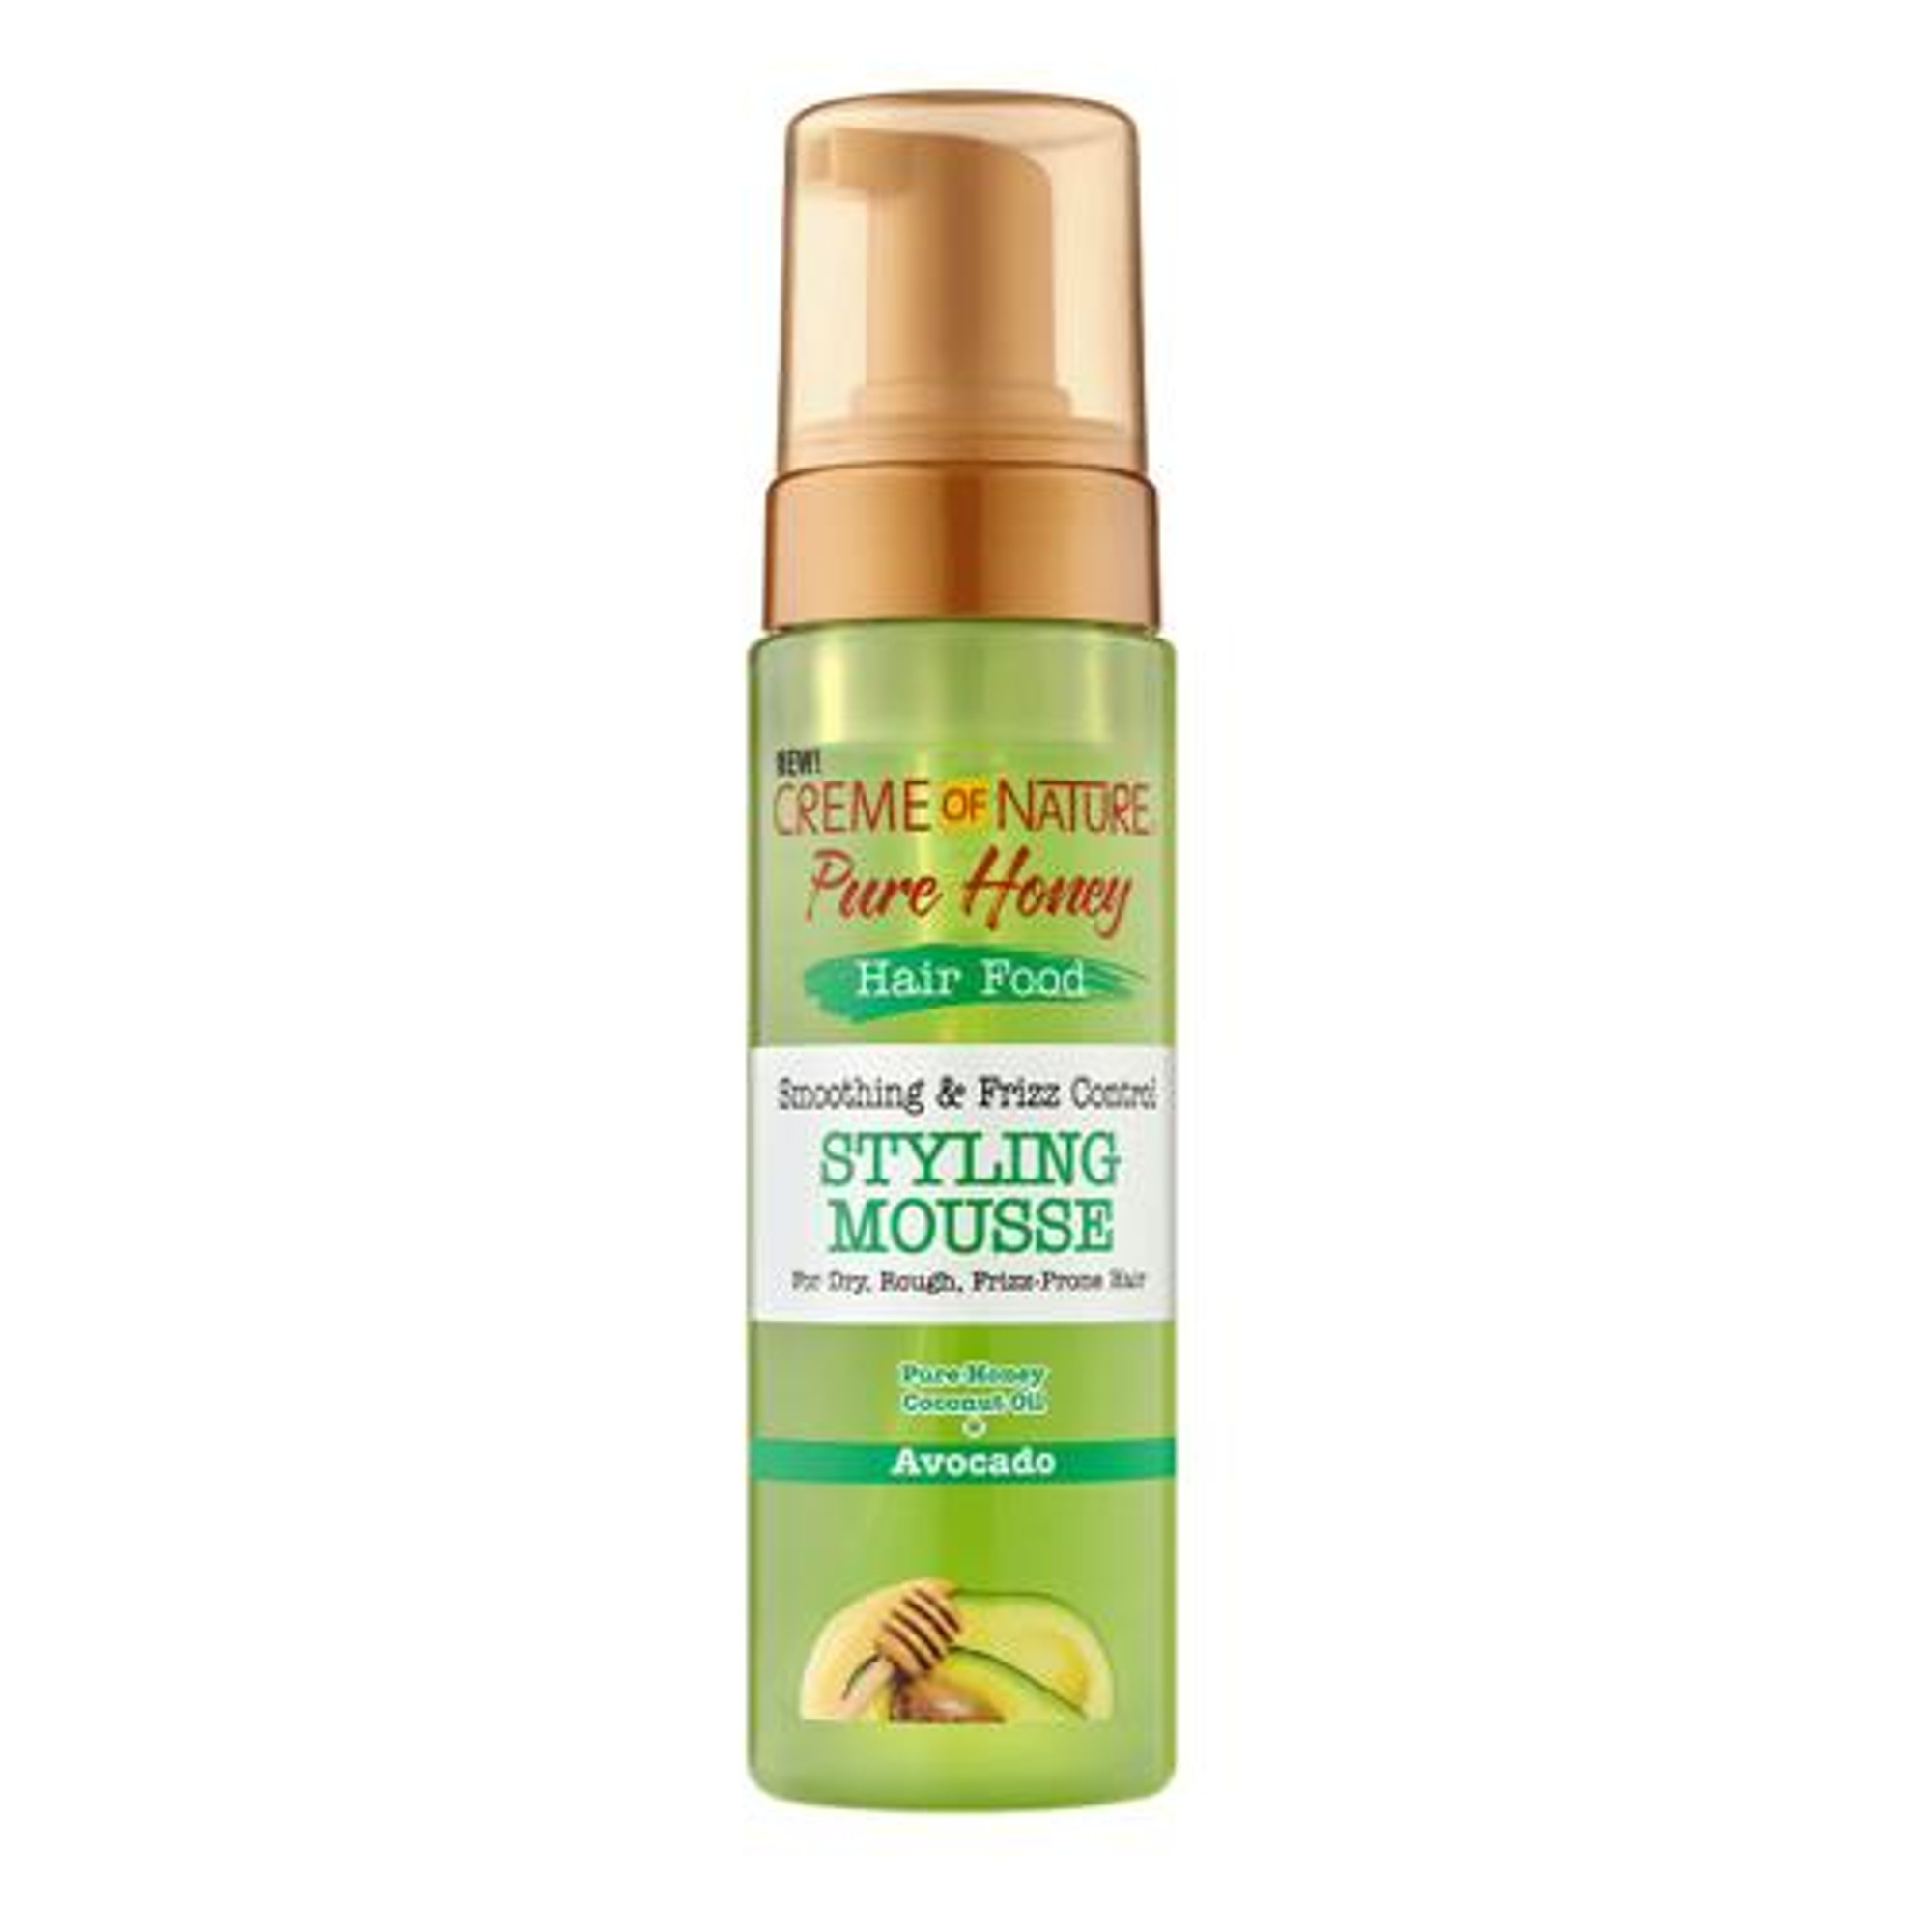 Creme of Nature  Pure Honey Hair Food Smoothing & Frizz Control Styling Mousse Avocado